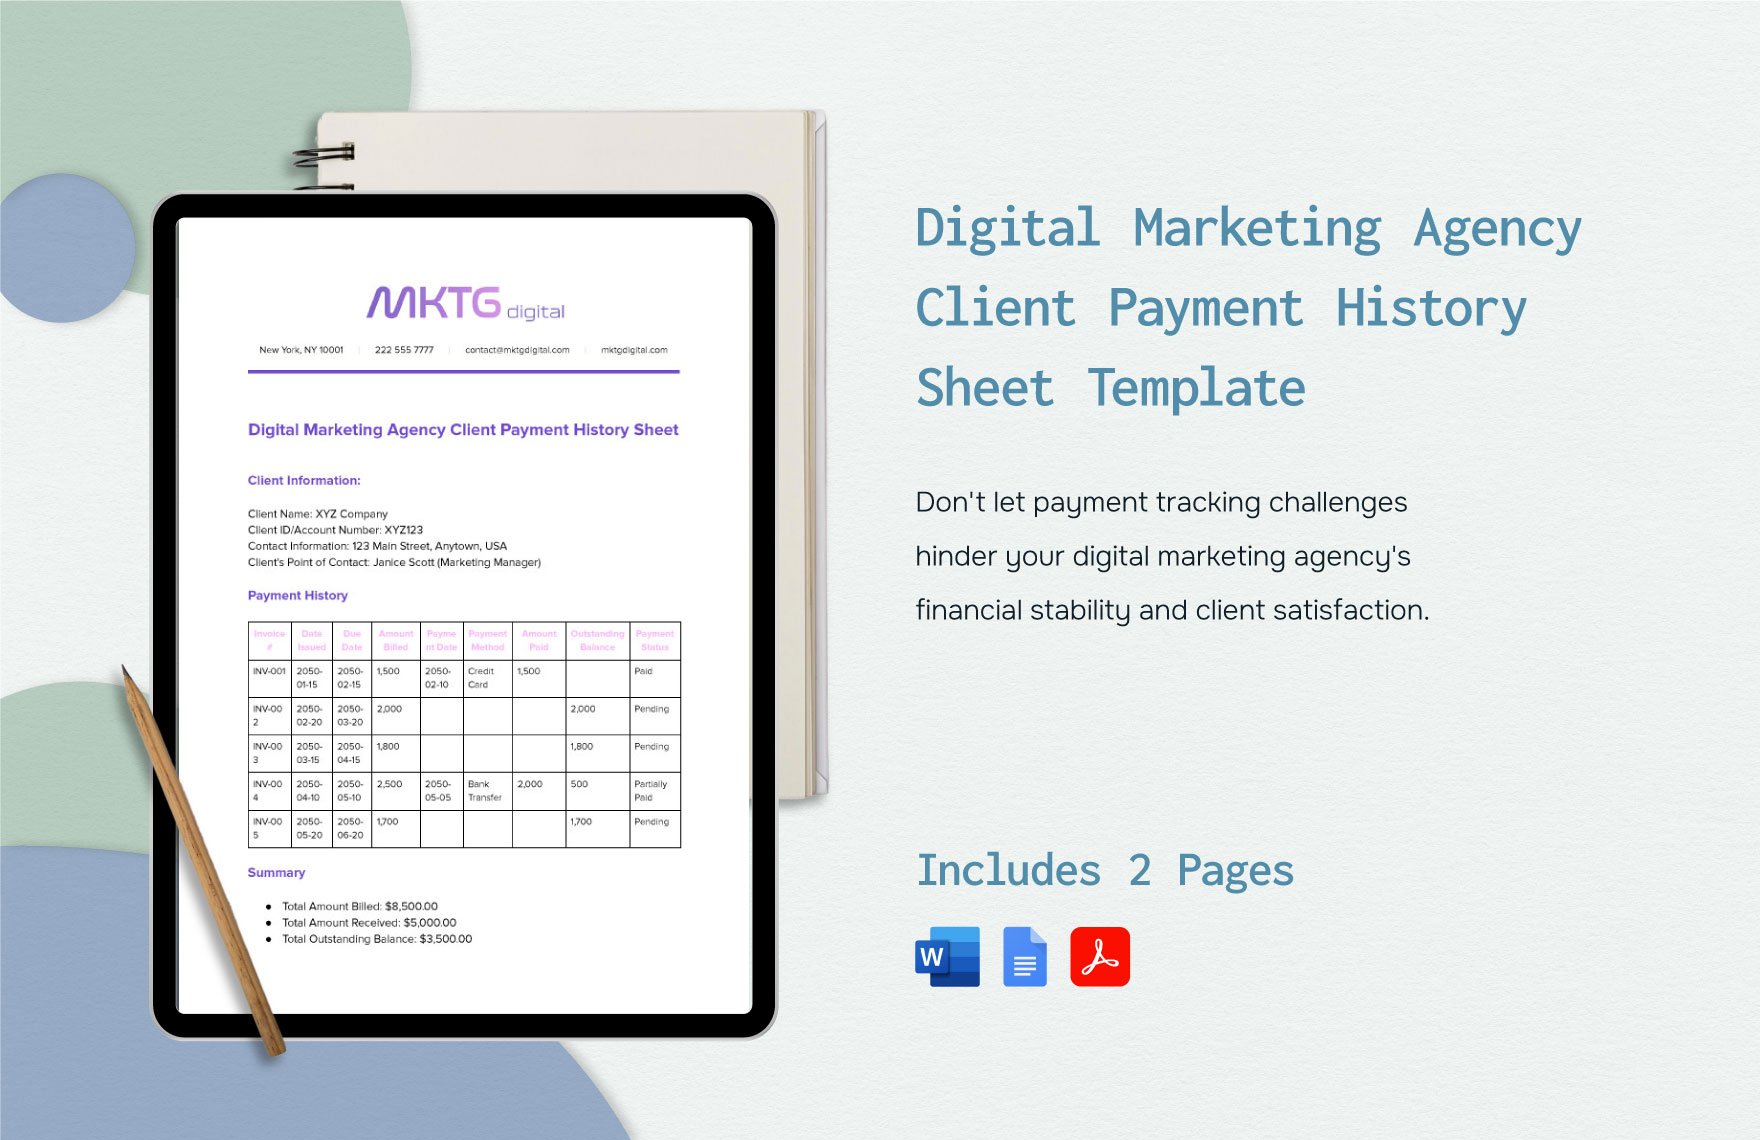 Digital Marketing Agency Client Payment History Sheet Template